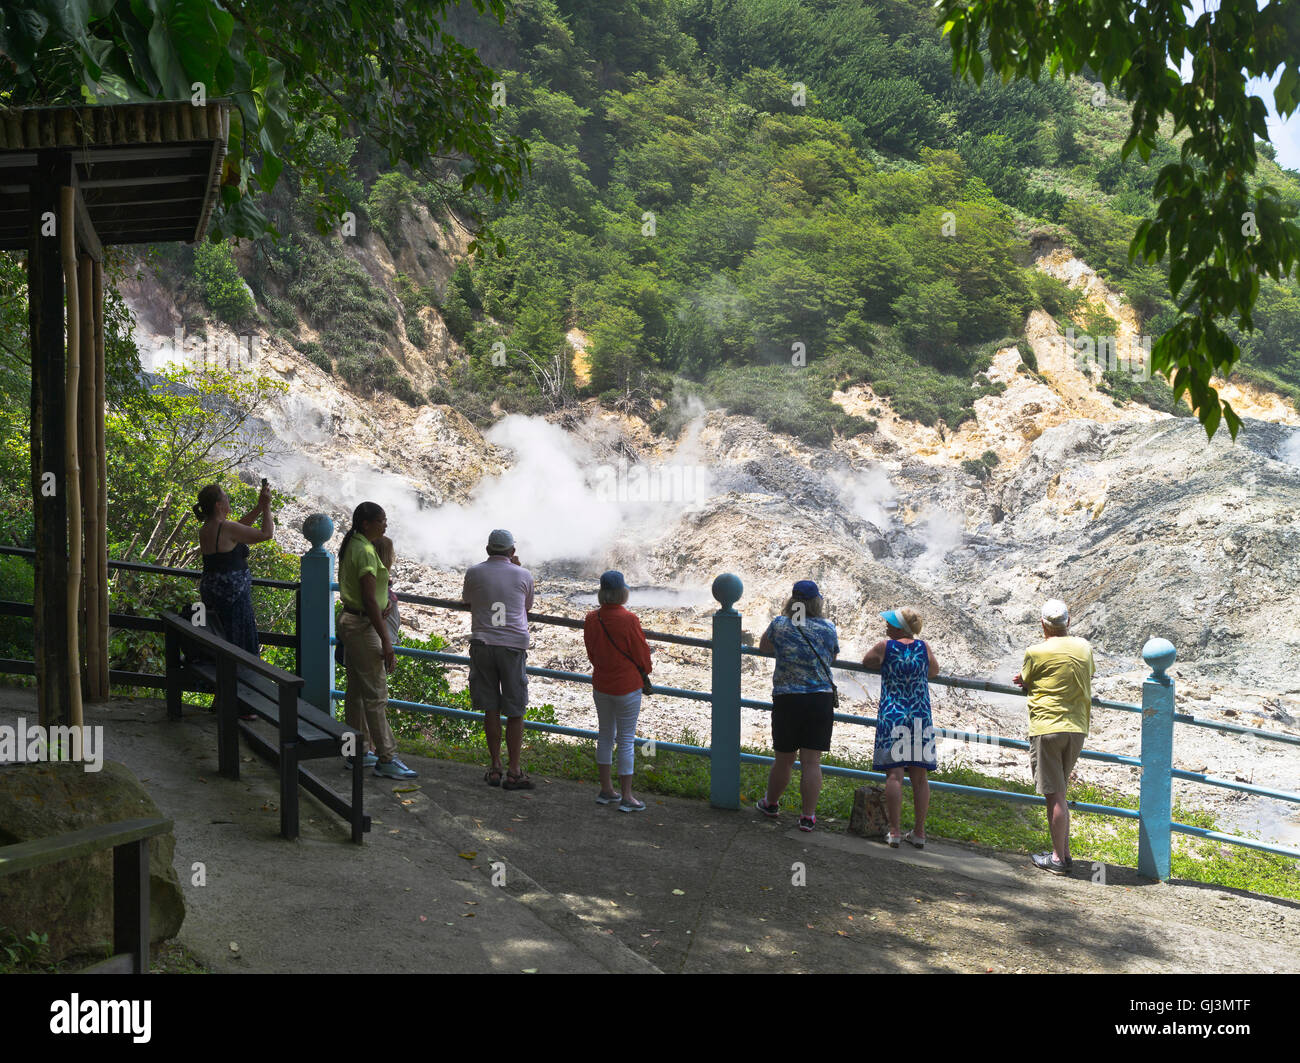 dh Sulphur Springs ST LUCIA CARIBBEAN Tourists viewing volcanic landscape people west indies Stock Photo